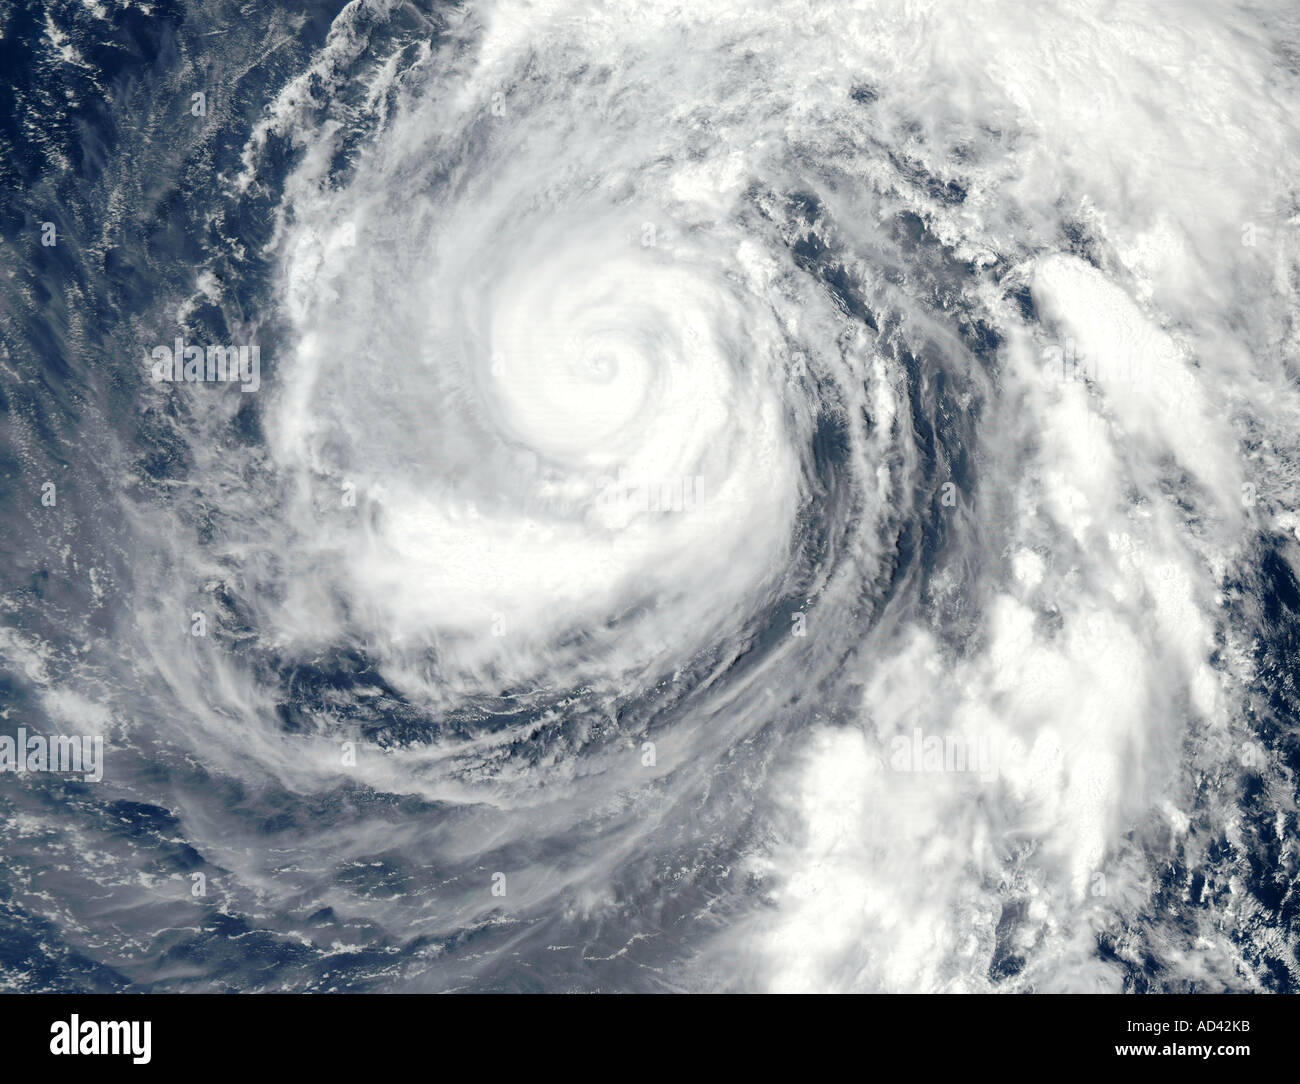 Typhoon Phanfone a nord delle Isole Marianne, Oceano Pacifico, immagine satellitare Foto Stock